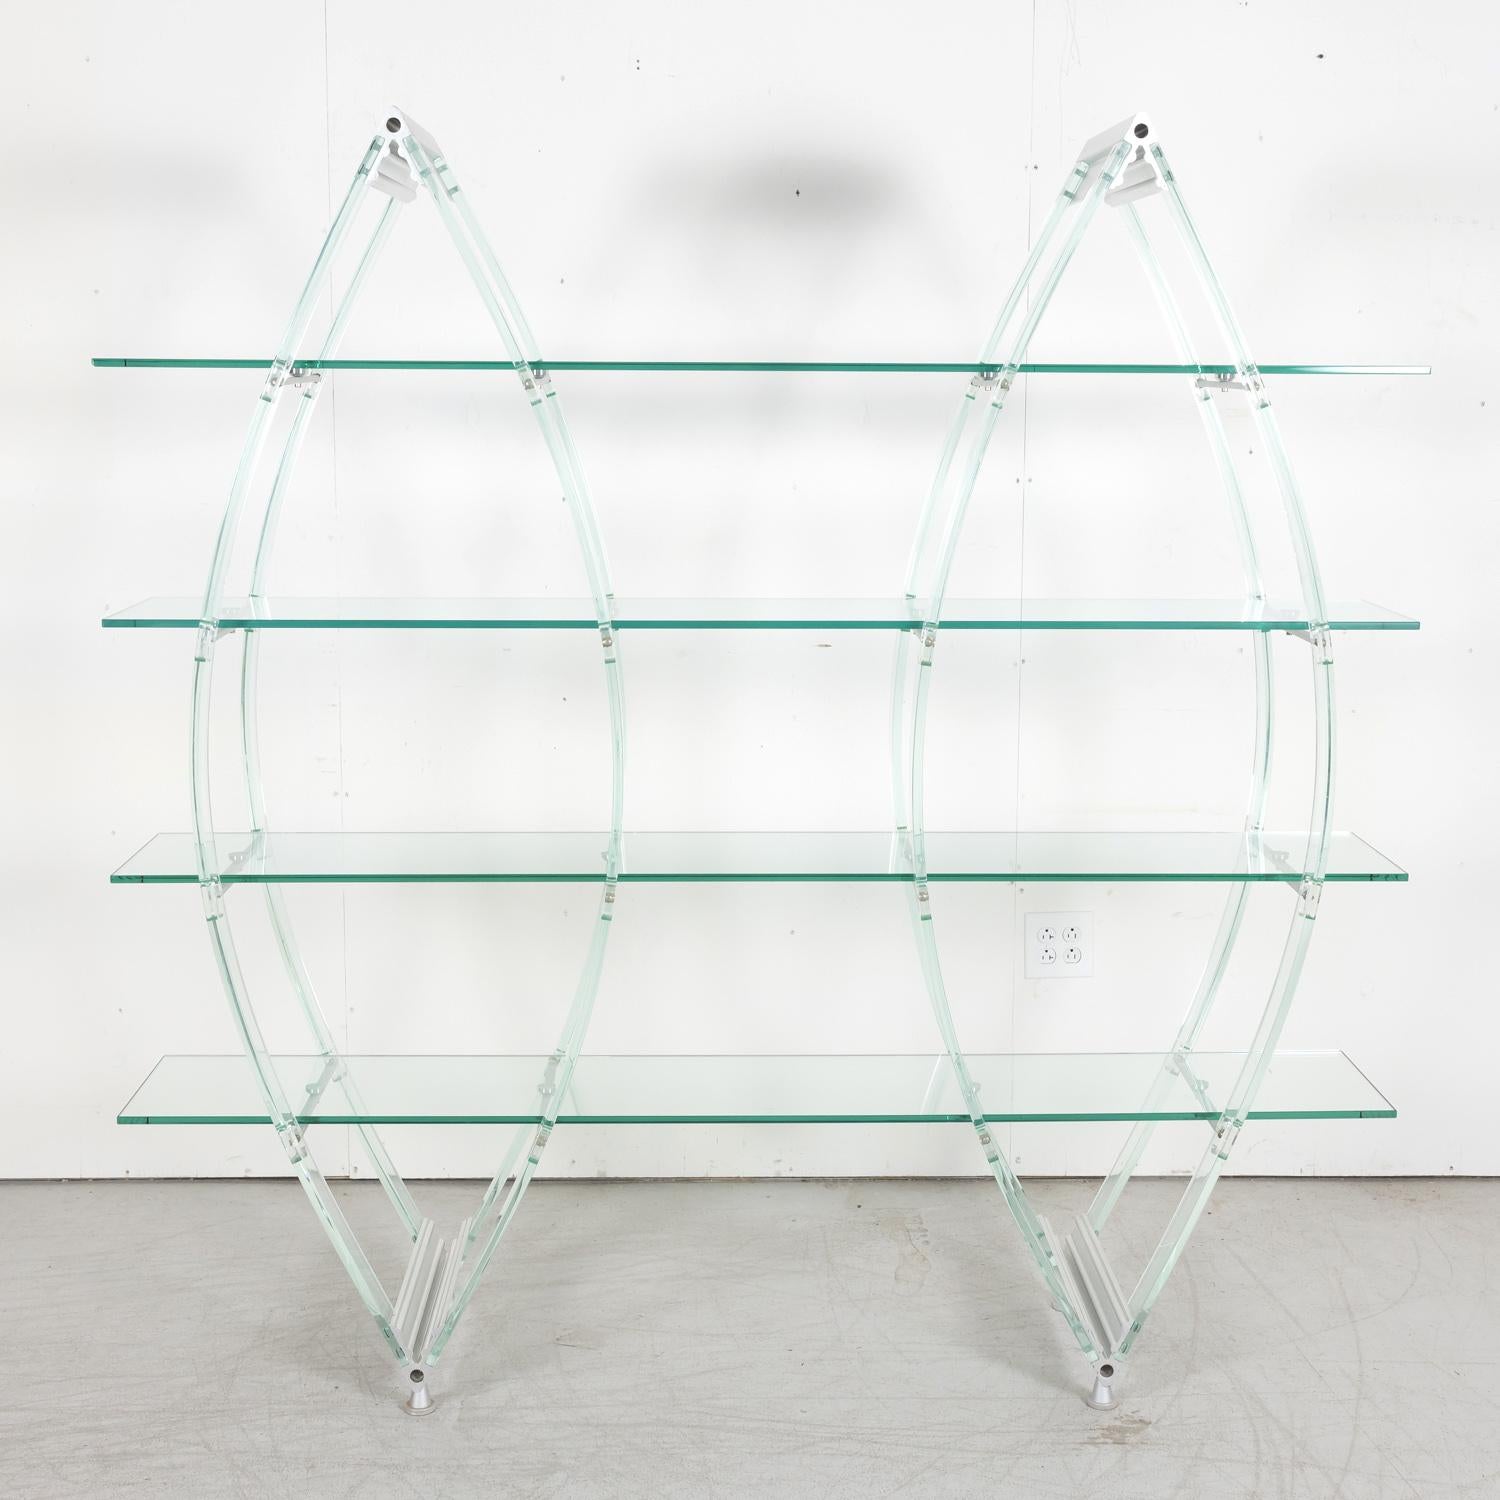 A vintage Italian Post-Modern bookcase or glass display unit having a refined sculptural form in the shape of double canoes featuring a minimalist acrylic and aluminum structure supporting 4 shelves made of tempered glass, circa 1980s. A versatile